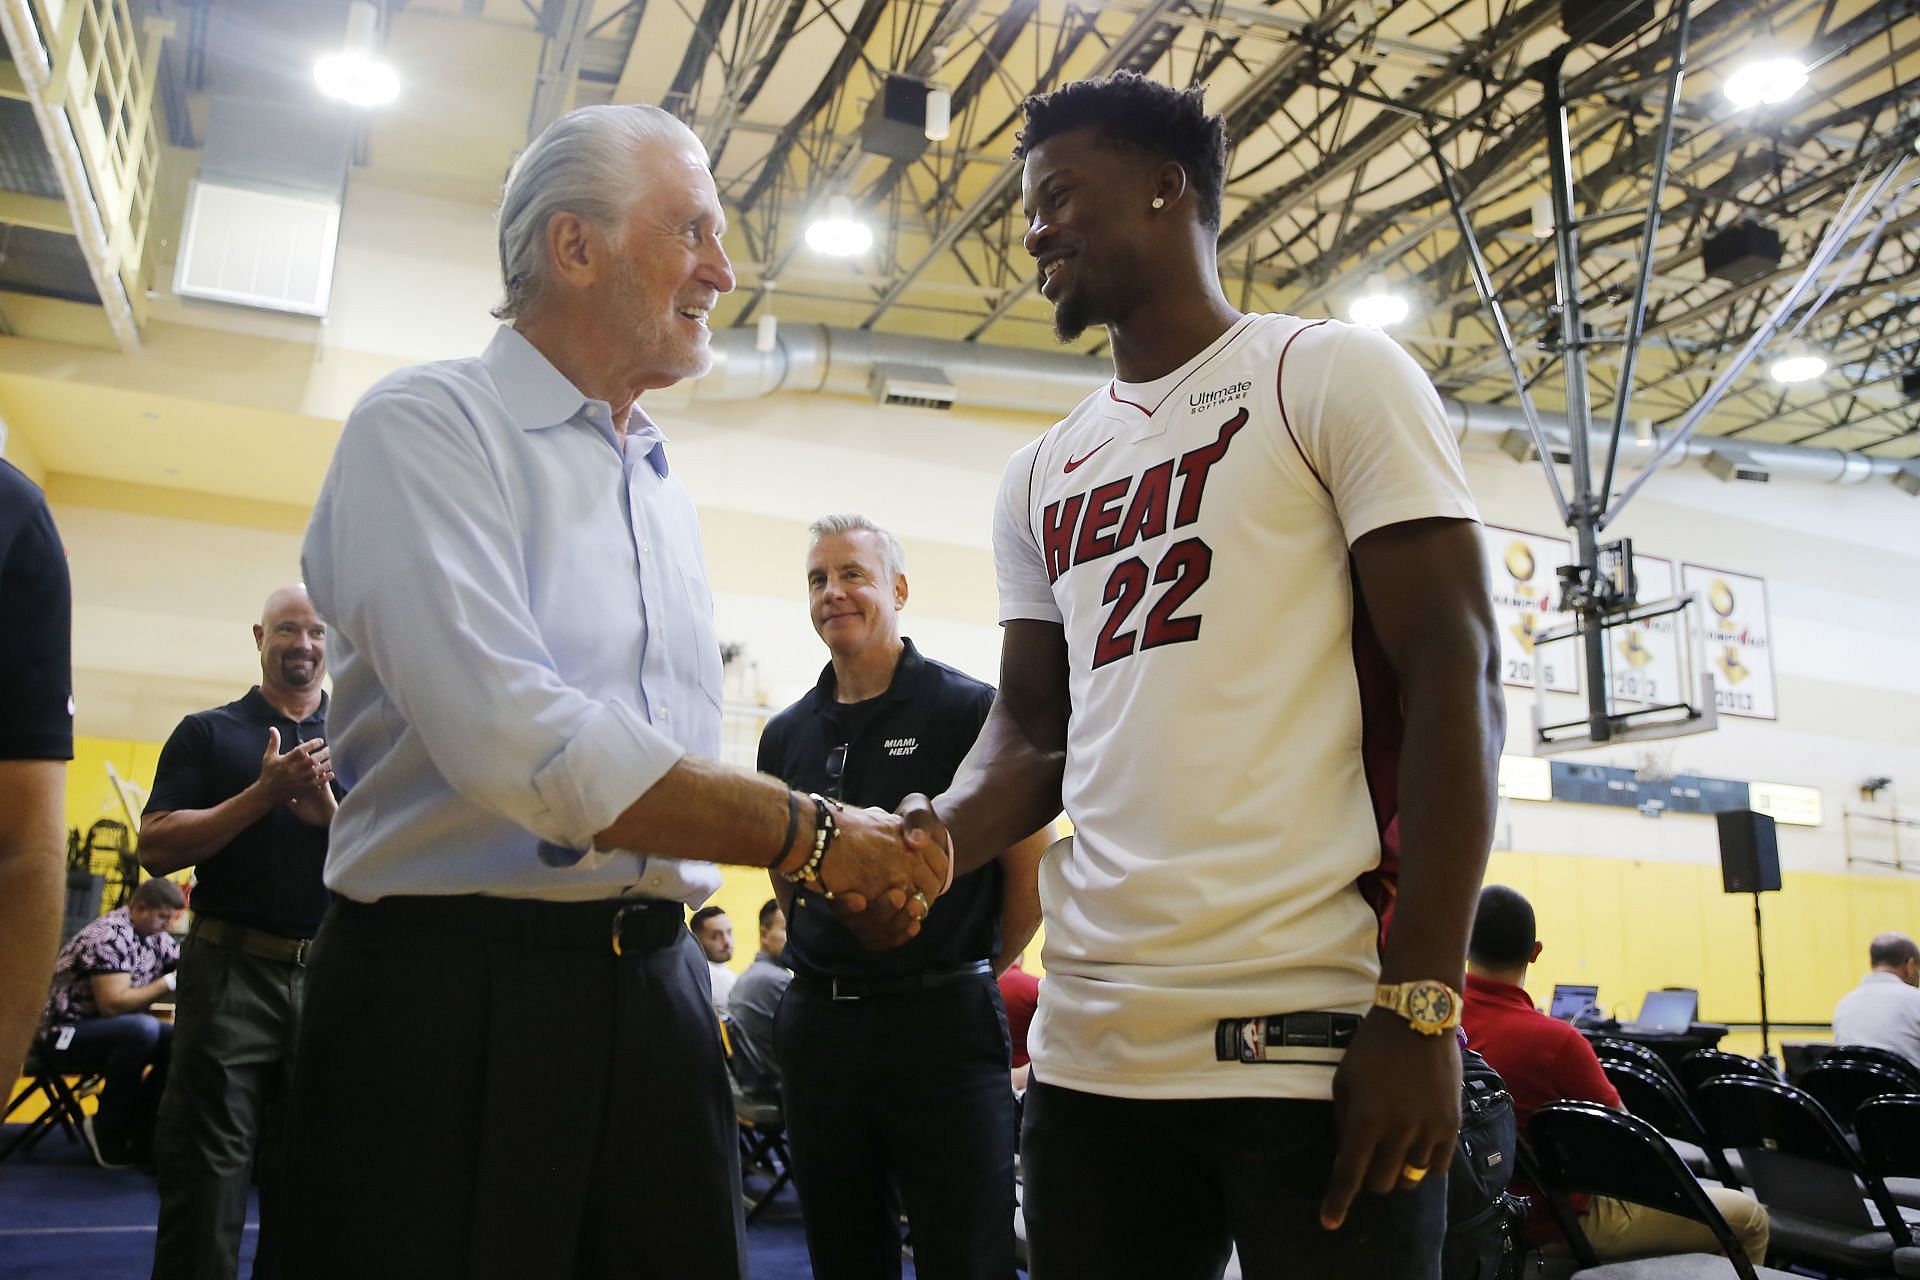 Pat Riley has brought many superstars to South Beach (Image via Getty Images)